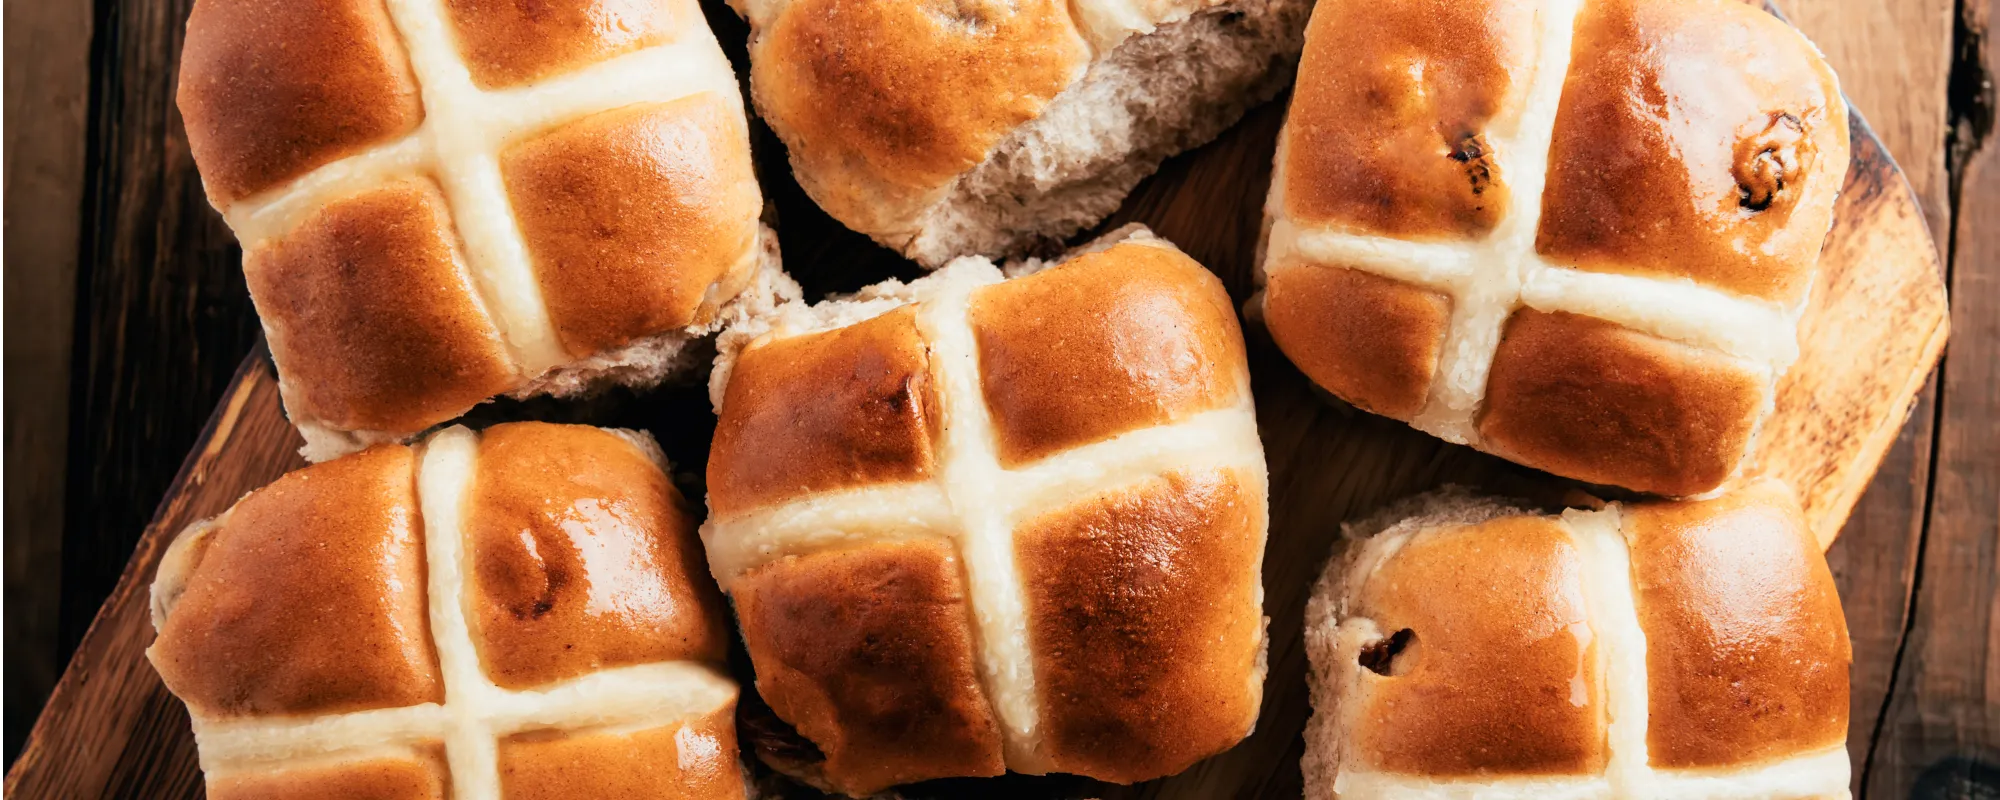 Behind the Meaning of the Ad Jingle Nursery Rhyme “Hot Cross Buns”